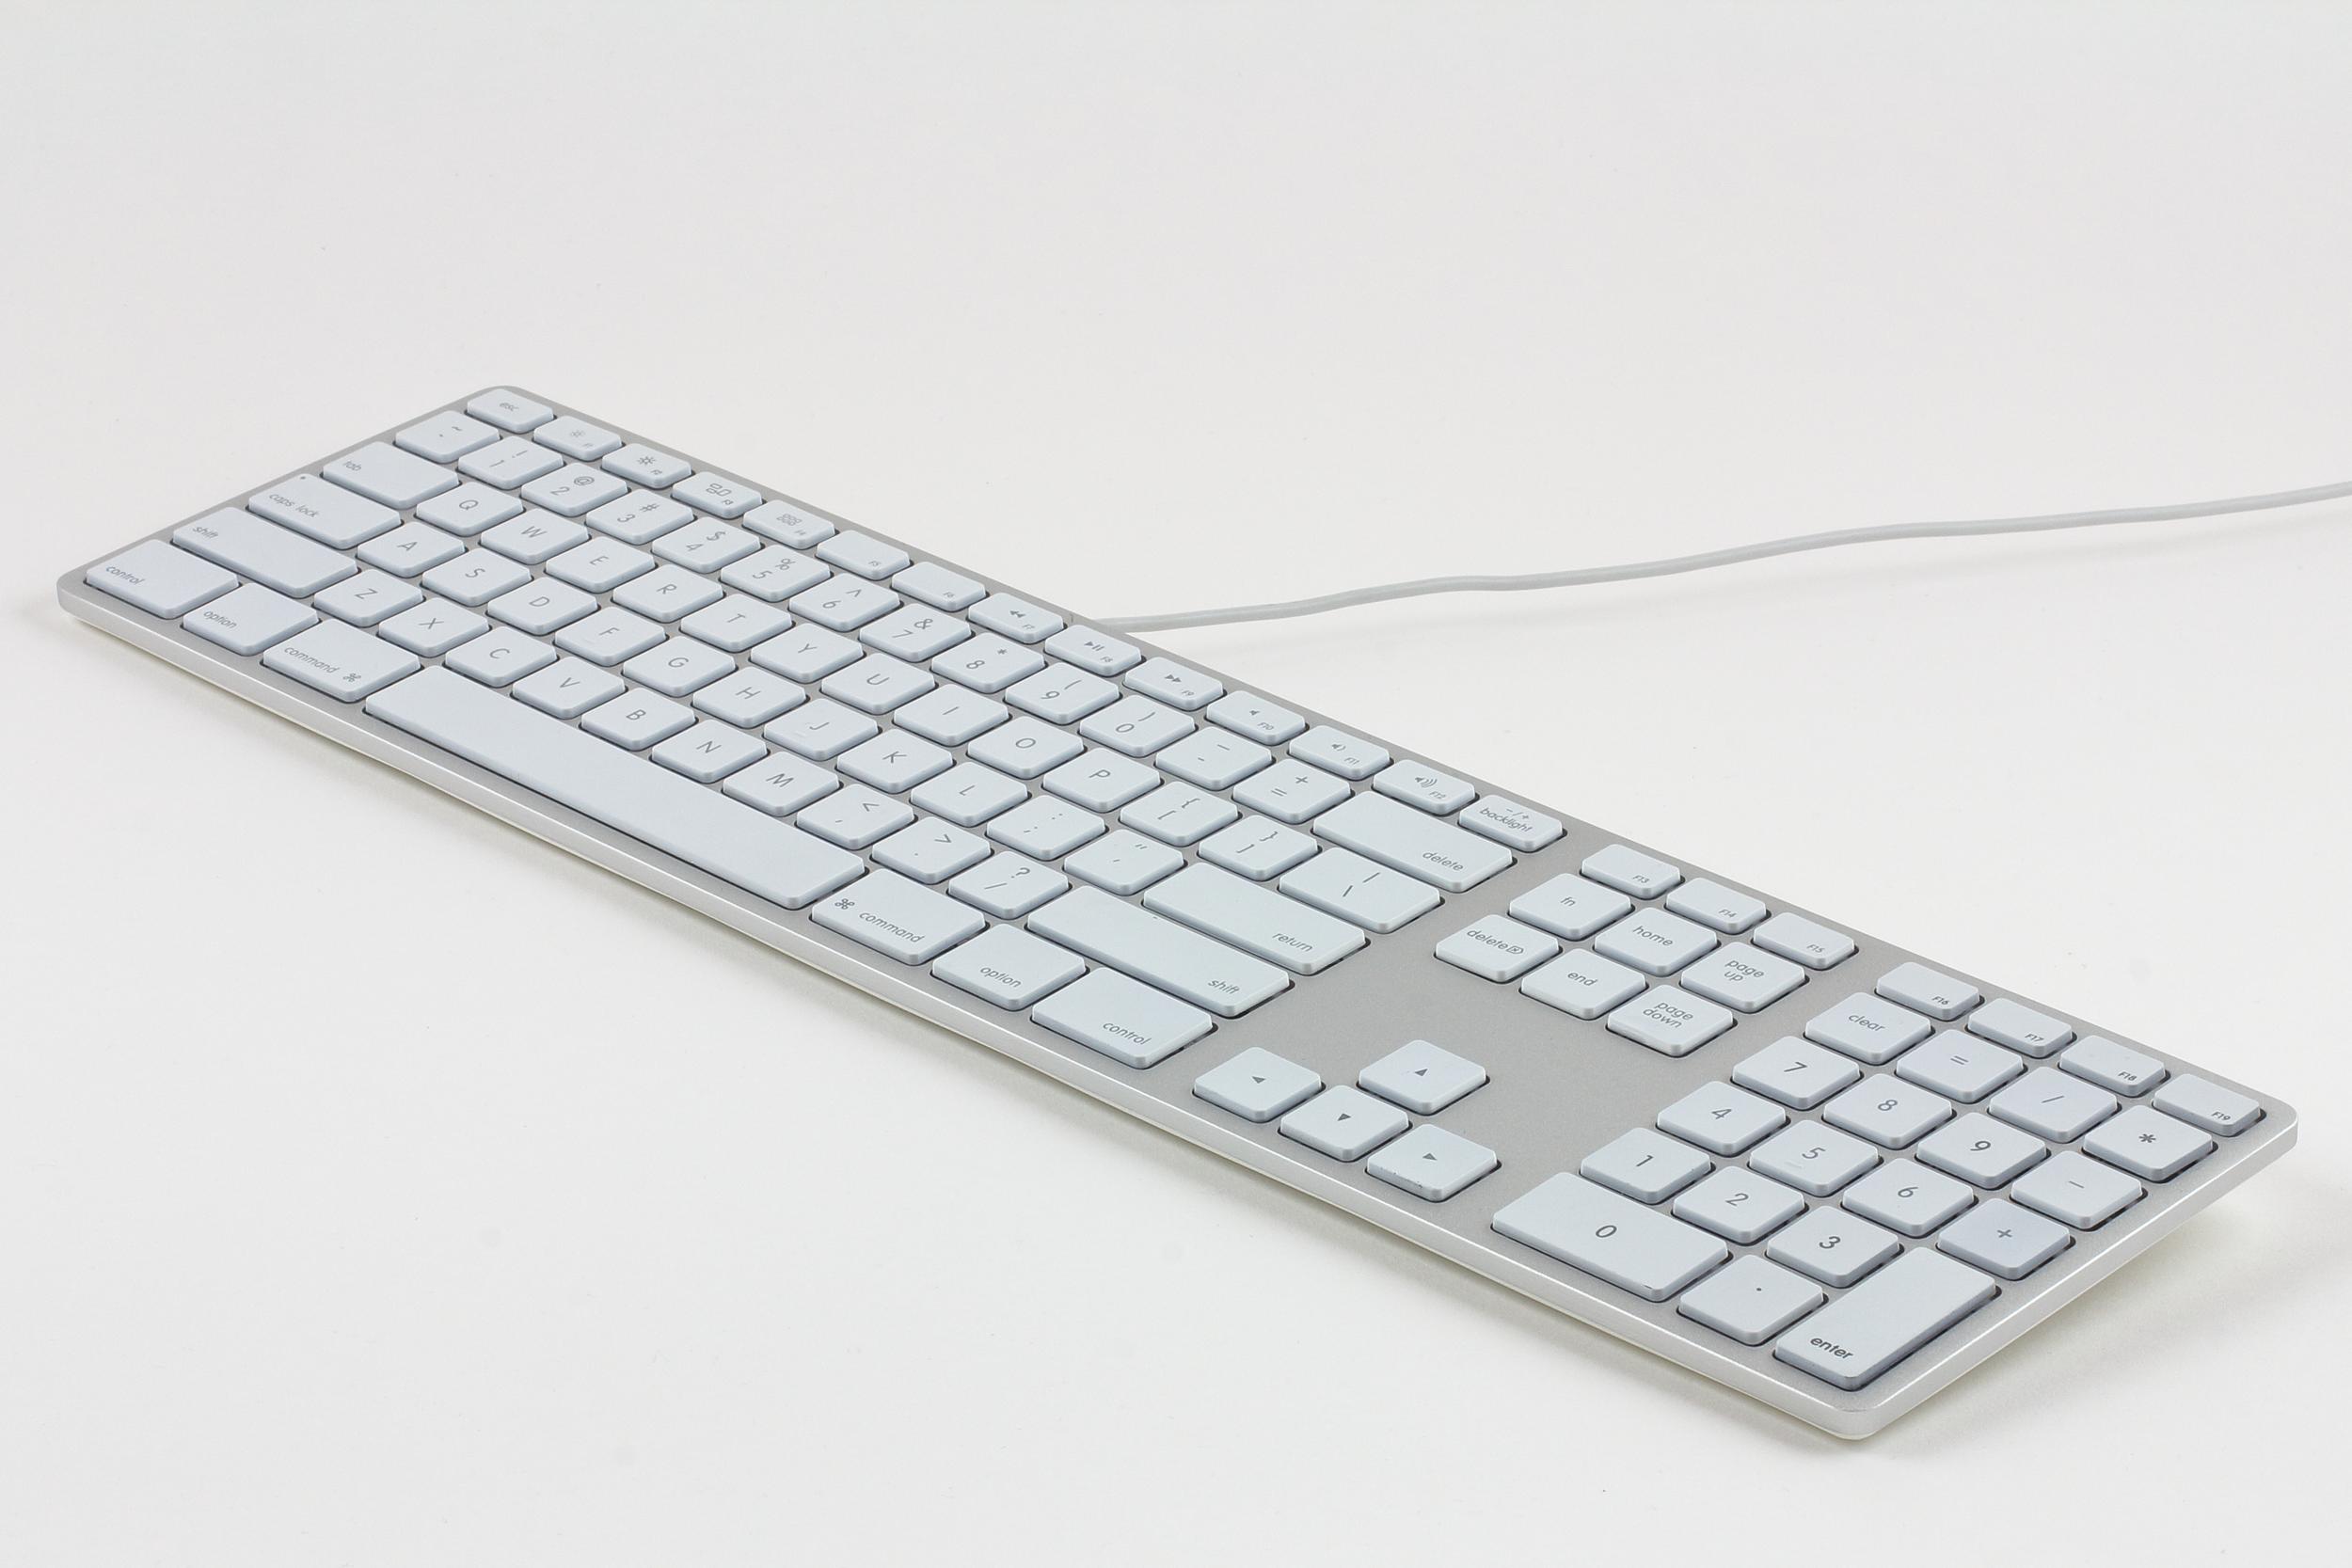 Matias Aluminum Extended USB Keyboard with Backlight GERMAN for Mac OS - Silver with white keys